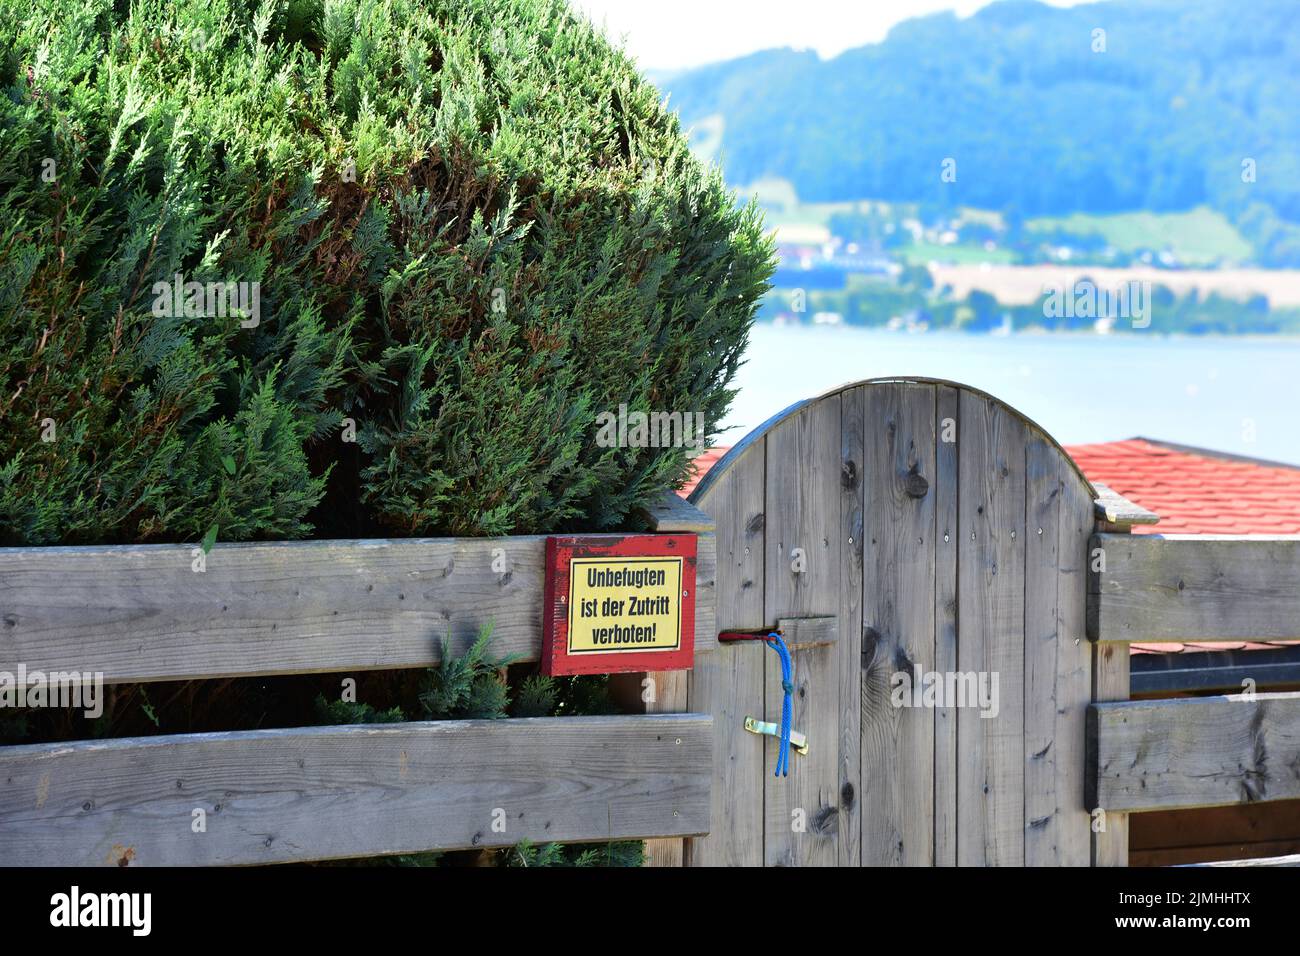 Privatgrundstück am Traunsee - Betreten verboten - Private property on Lake Traunsee - entering prohibited Stock Photo